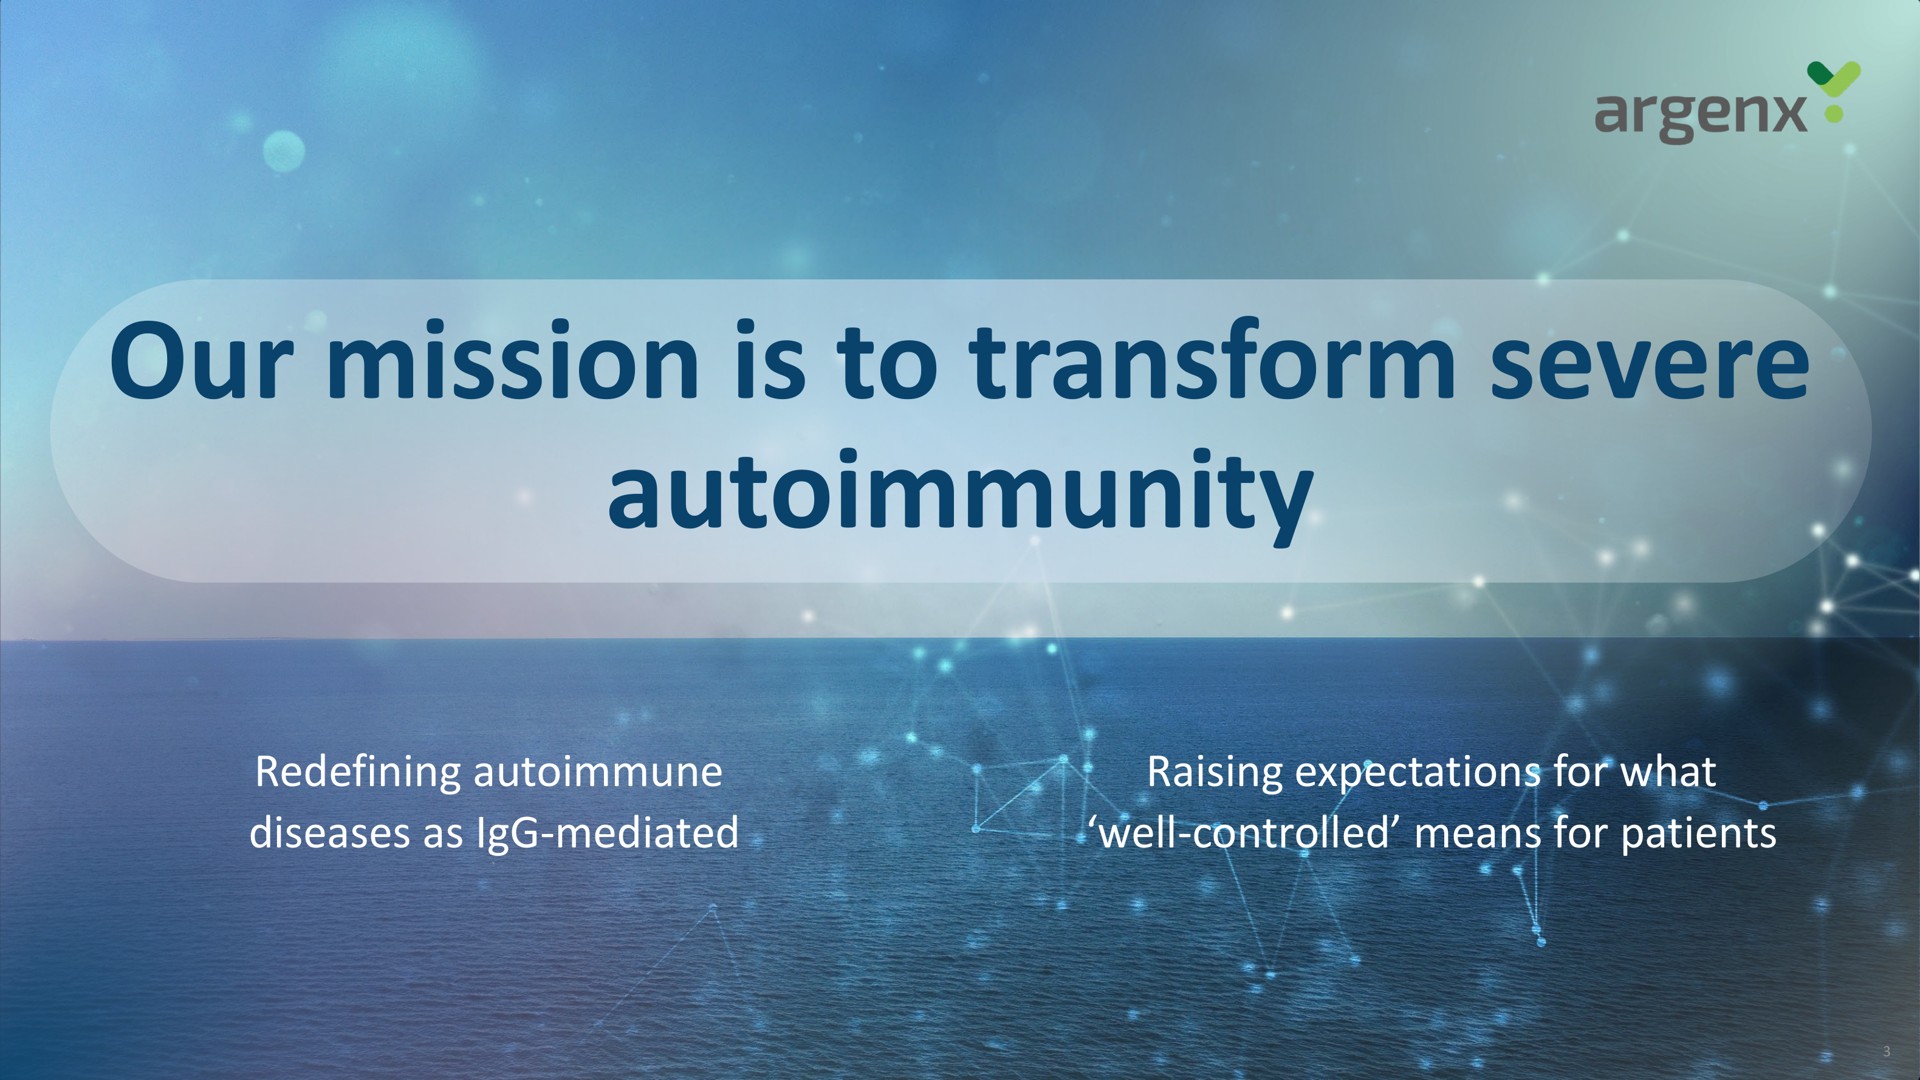 our mission is to transform severe autoimmunity diseases mediated eve patel | argenx SE